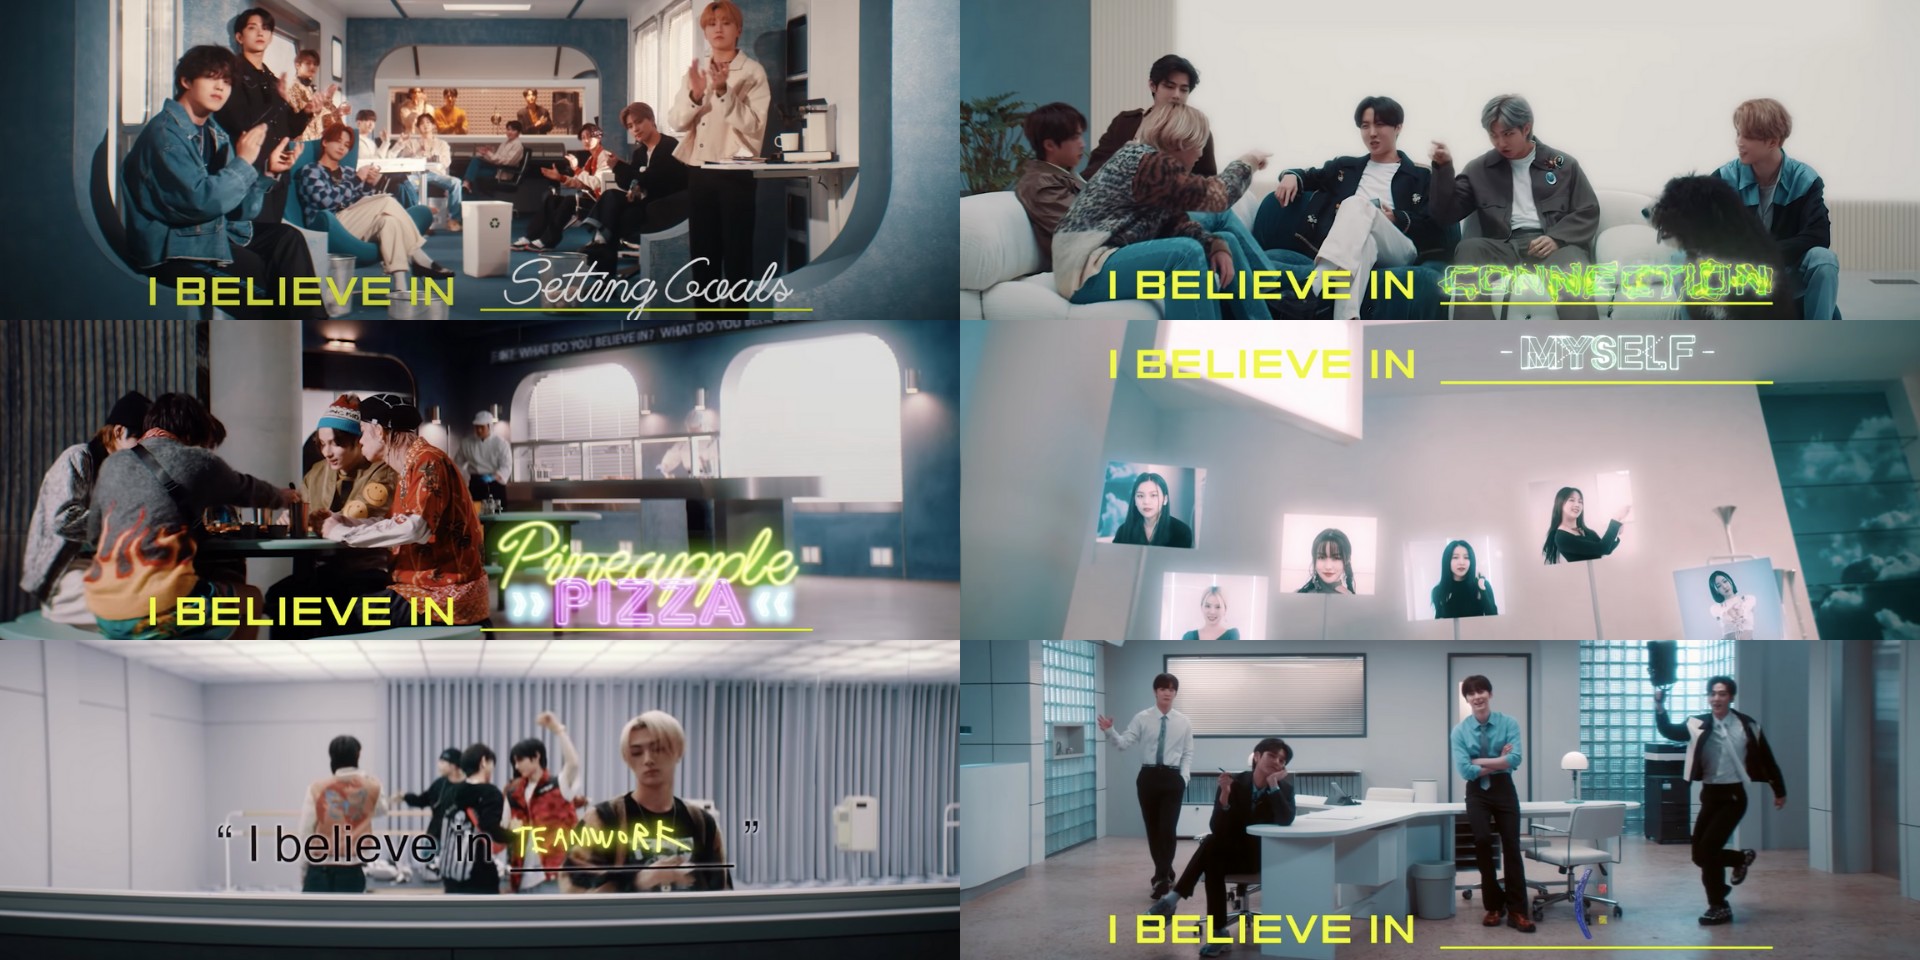 Big Hit Label artists ask 'WHAT DO YOU BELIEVE IN?' in new campaign film starring BTS, SEVENTEEN, GFRIEND, TXT, NU'EST, and ENHYPEN